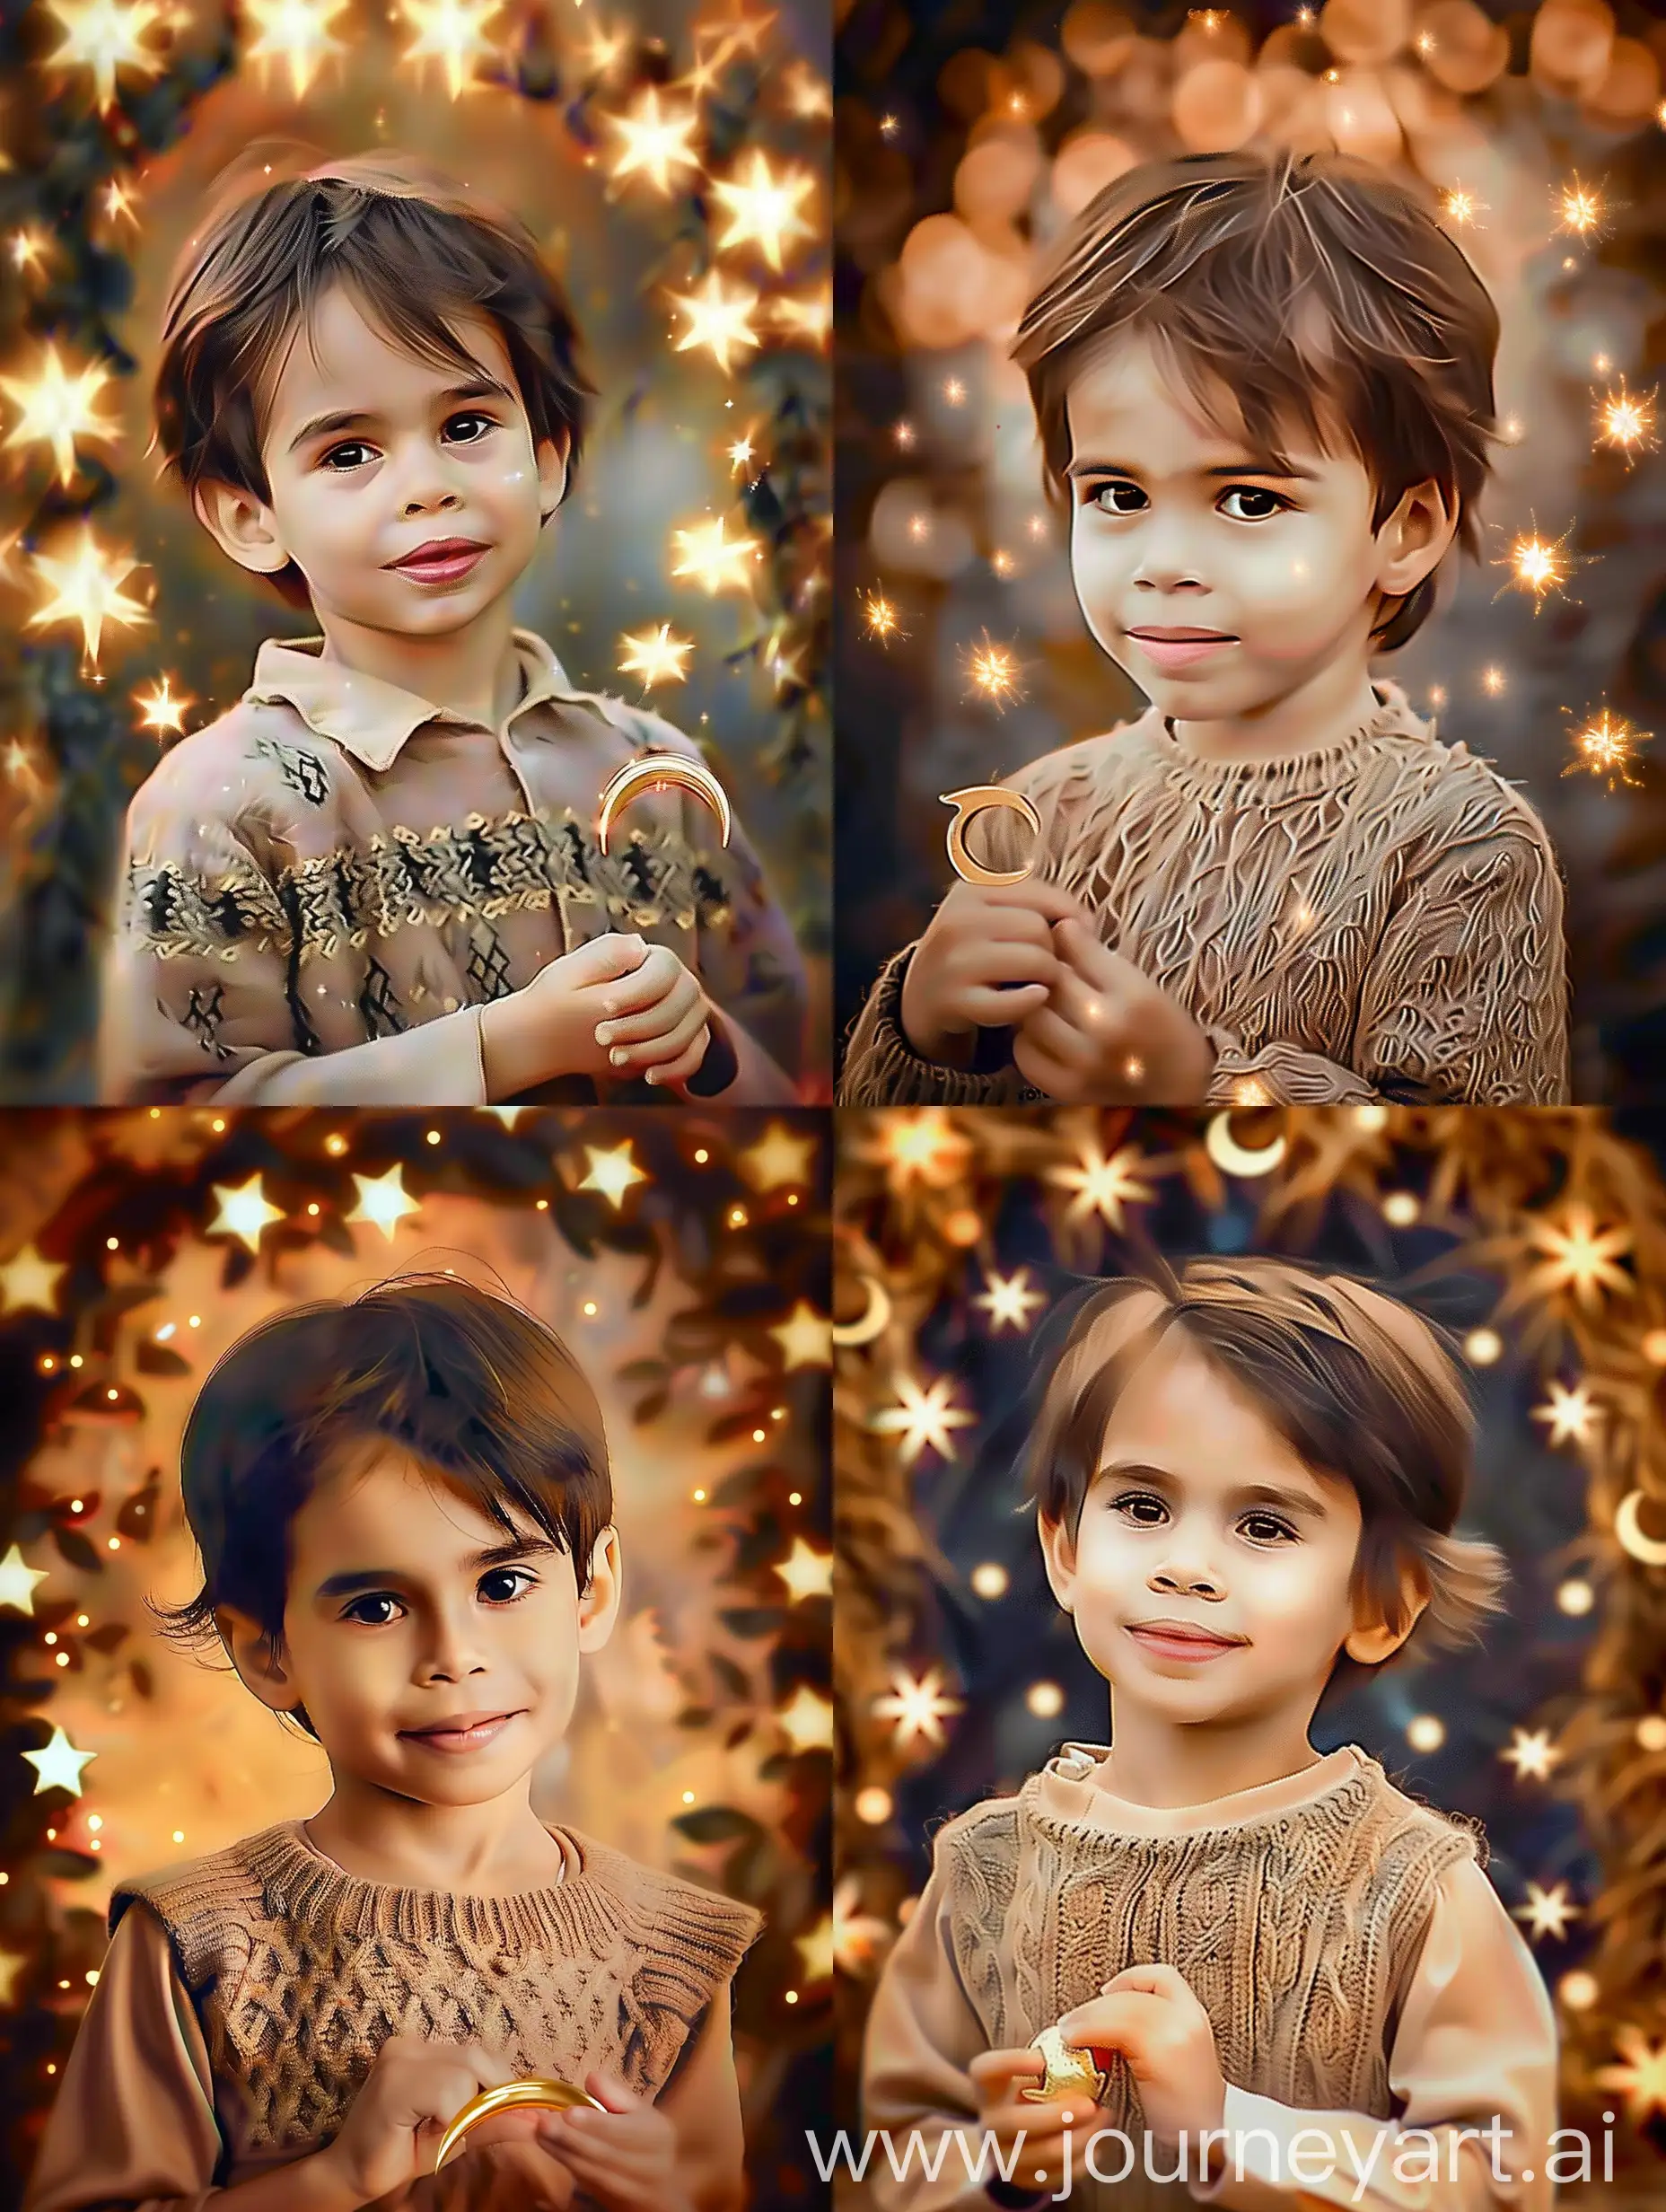 Smiling-Toddler-in-Woolen-Dress-with-Golden-Stars-and-Crescent-Moon